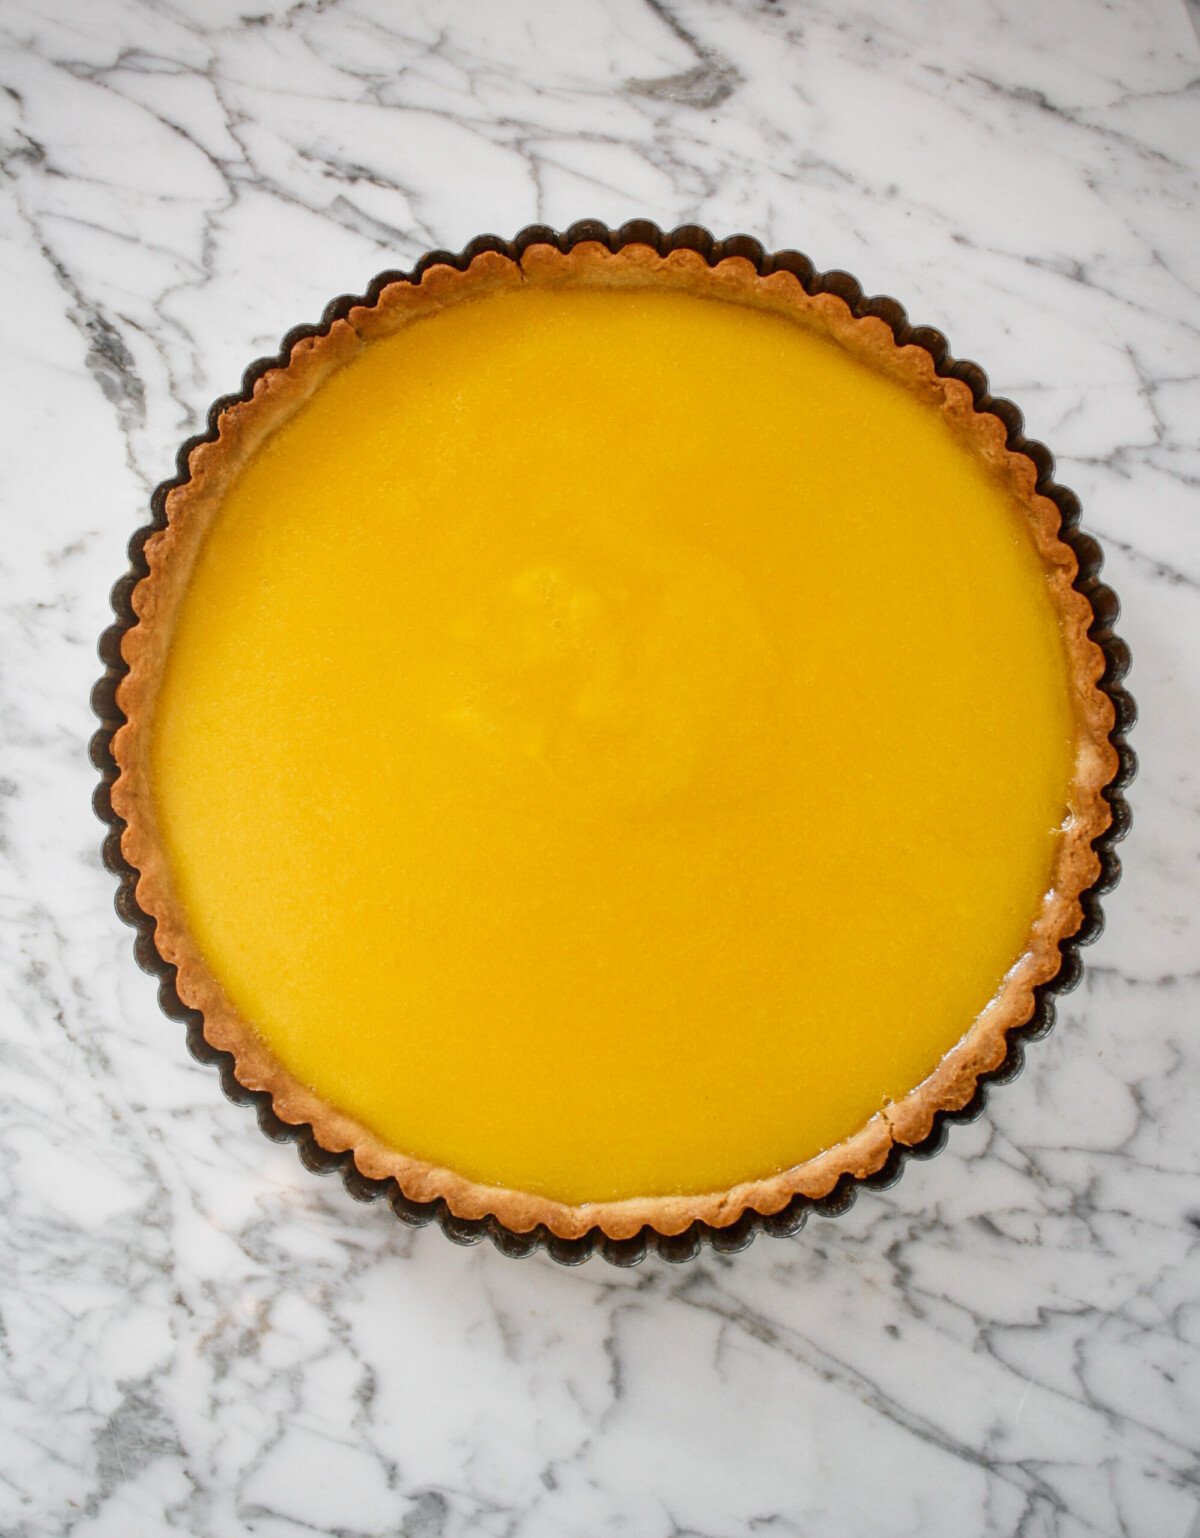 Tart pan lined with baked tart crust and filled with lemon curd set on top of a marble surface.